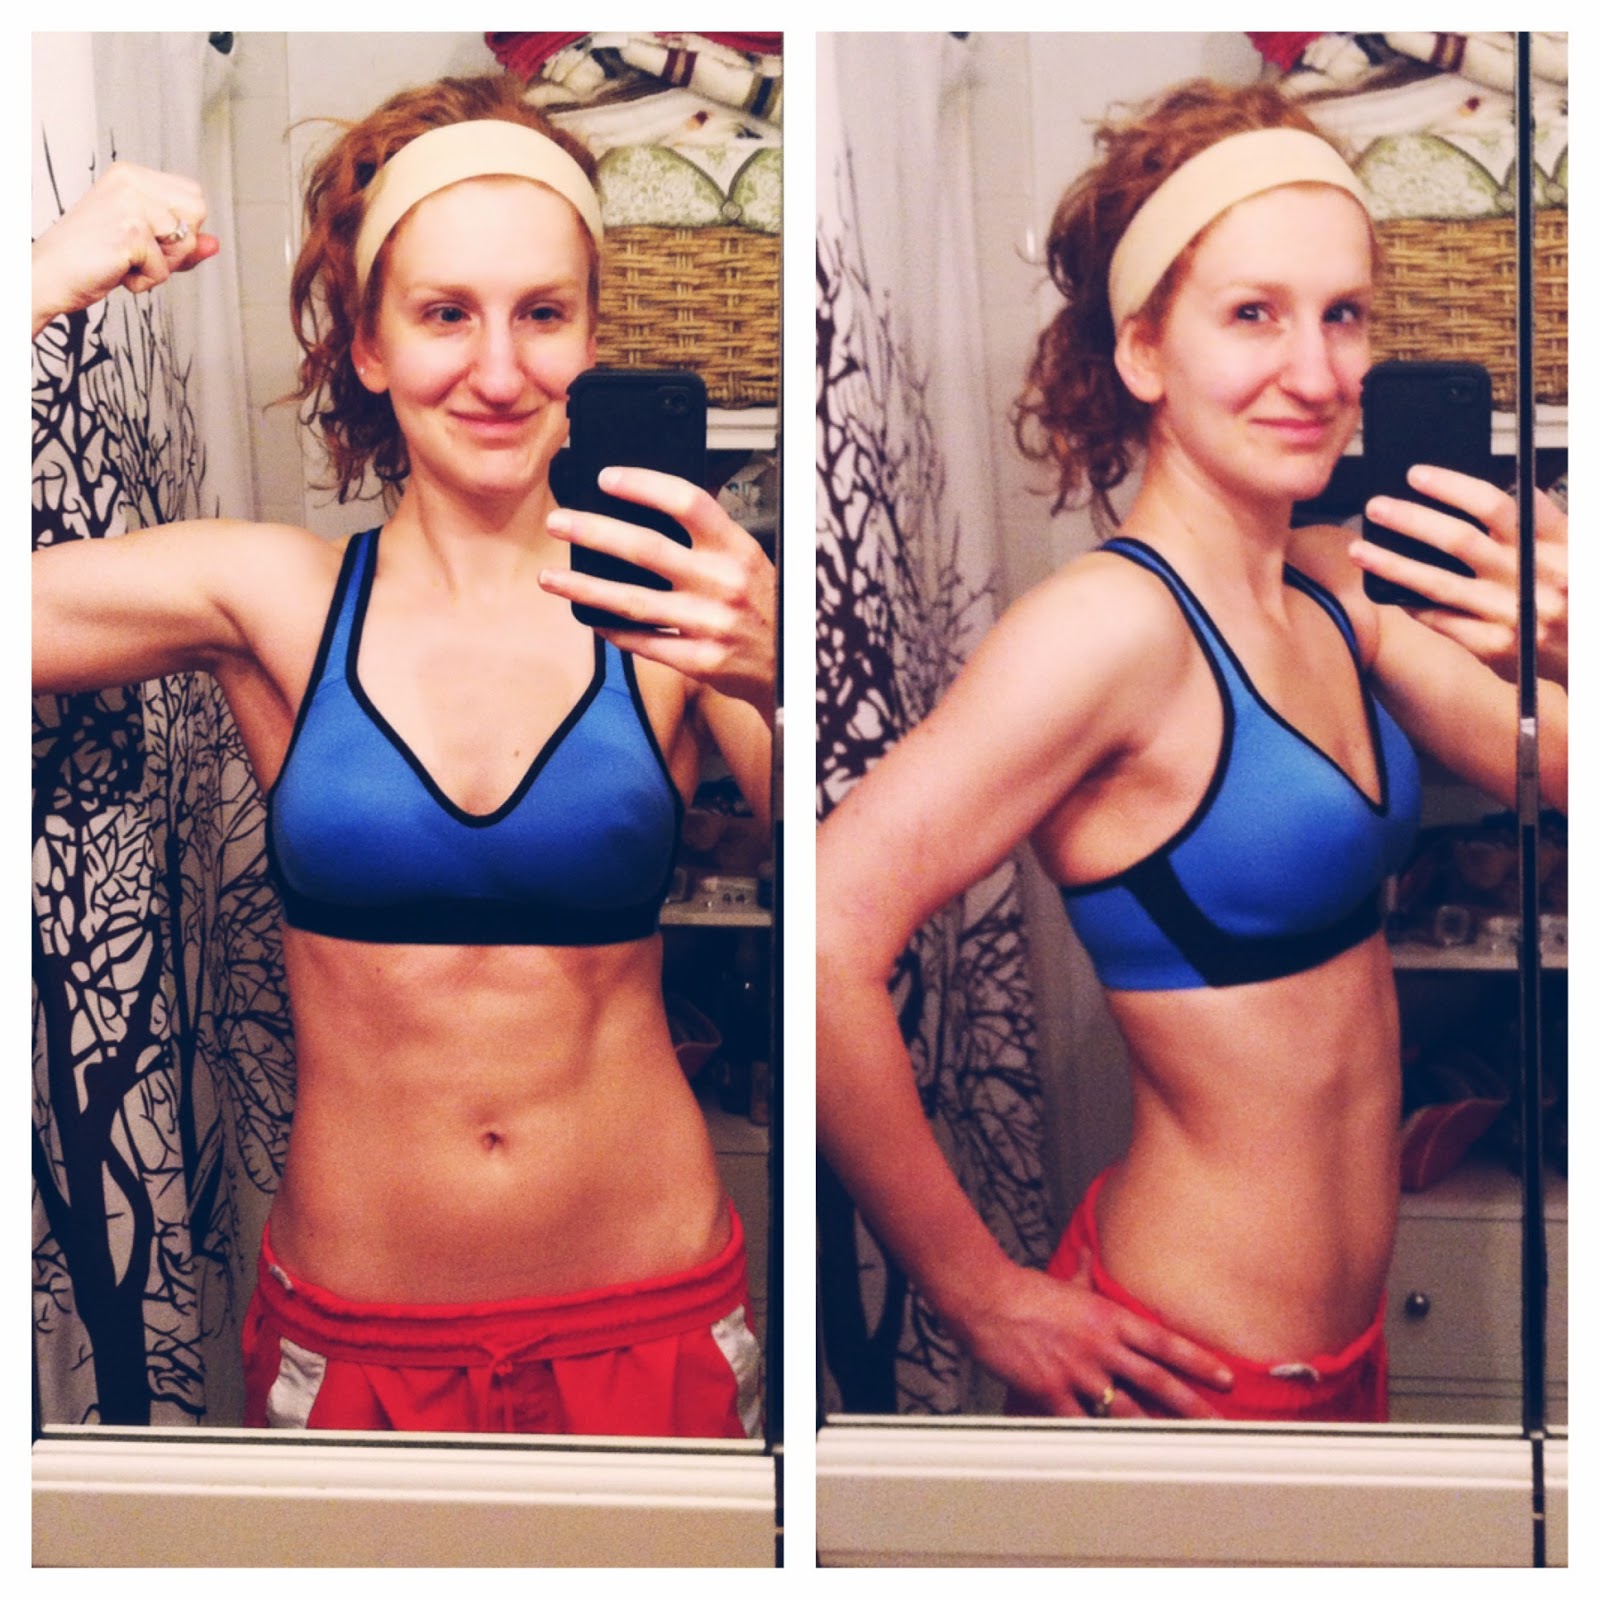 21-Day Fix Before-and-After Photos